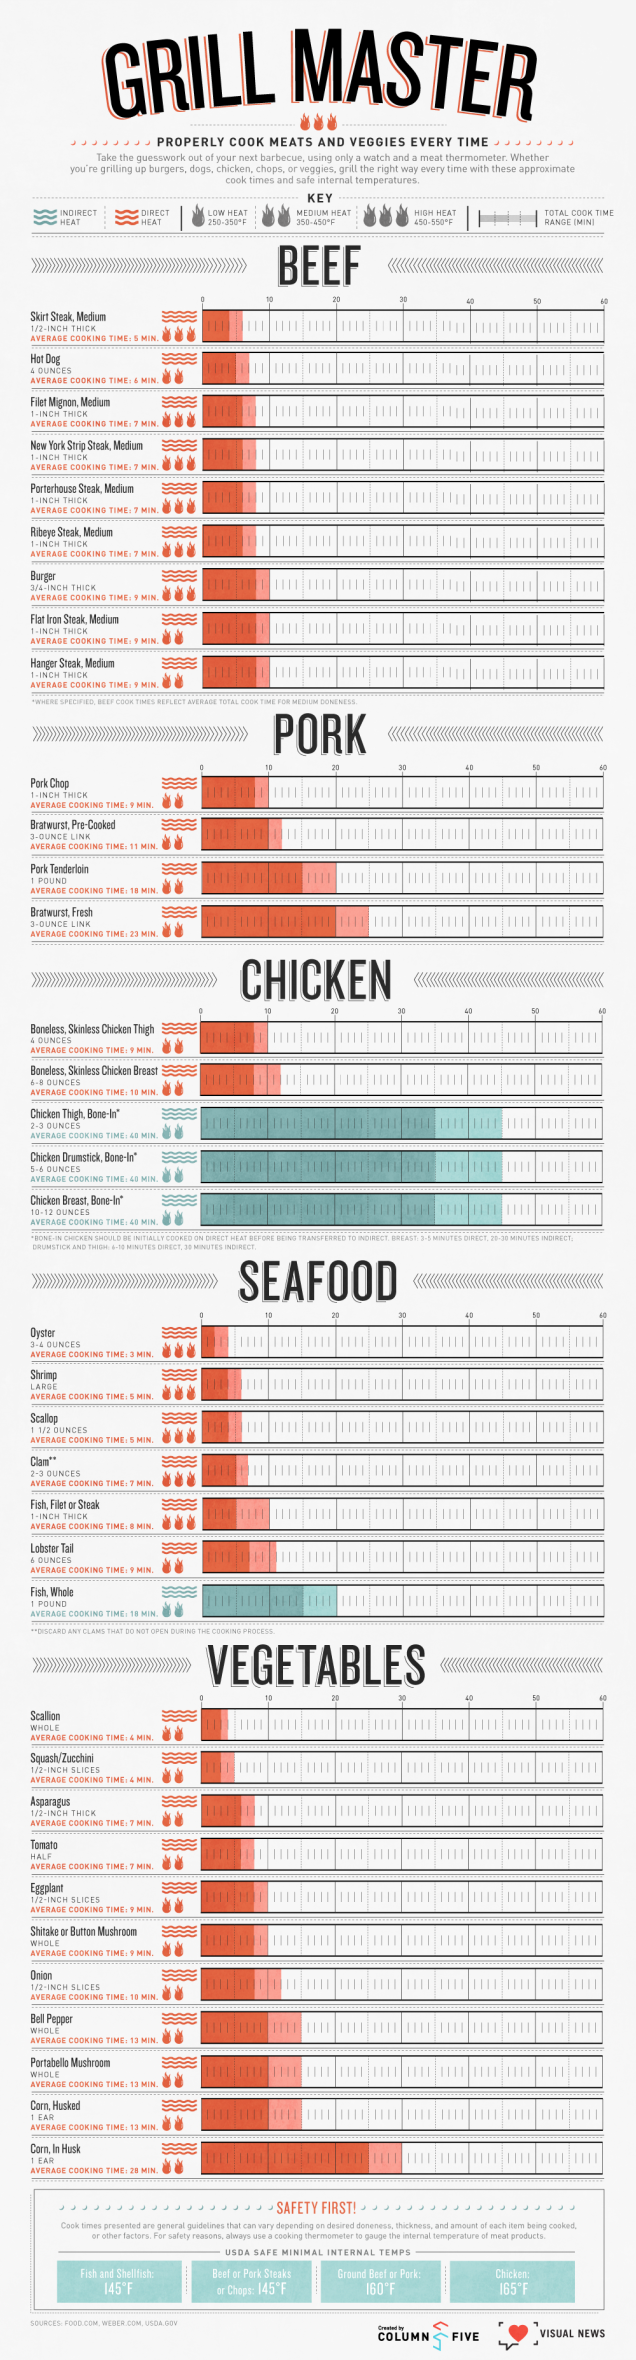 The graphic is comprehensive and includes beef, pork, seafood and veggies. Not only does it tell you the different cooking times,